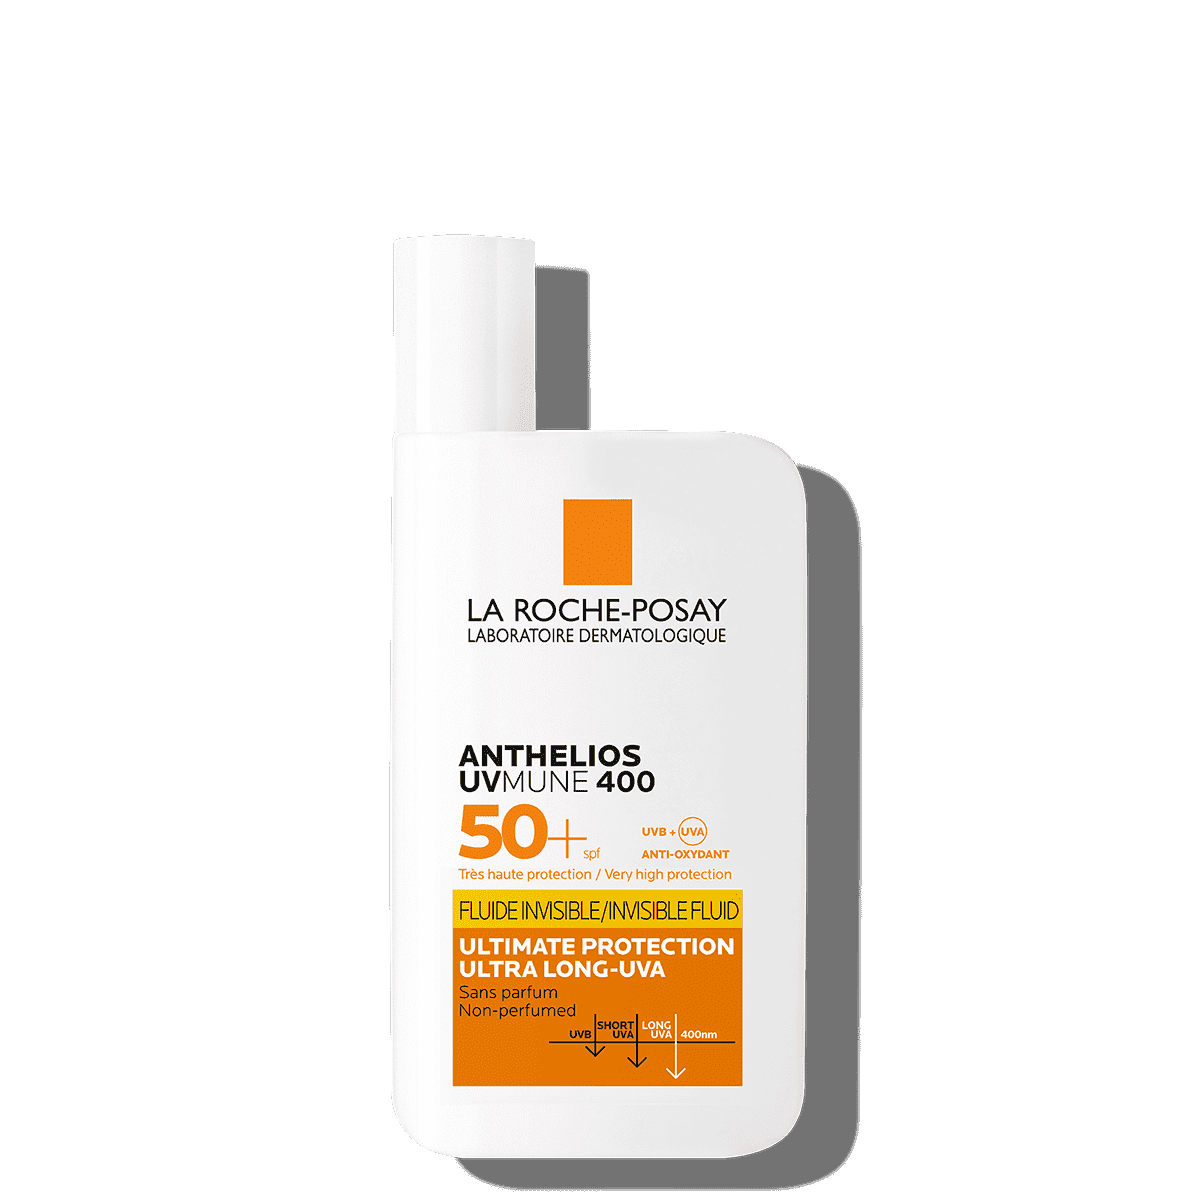 La Roche-Posay Anthelios UVmune 400 Tinted Fluid SPF50+ - The Power Chic